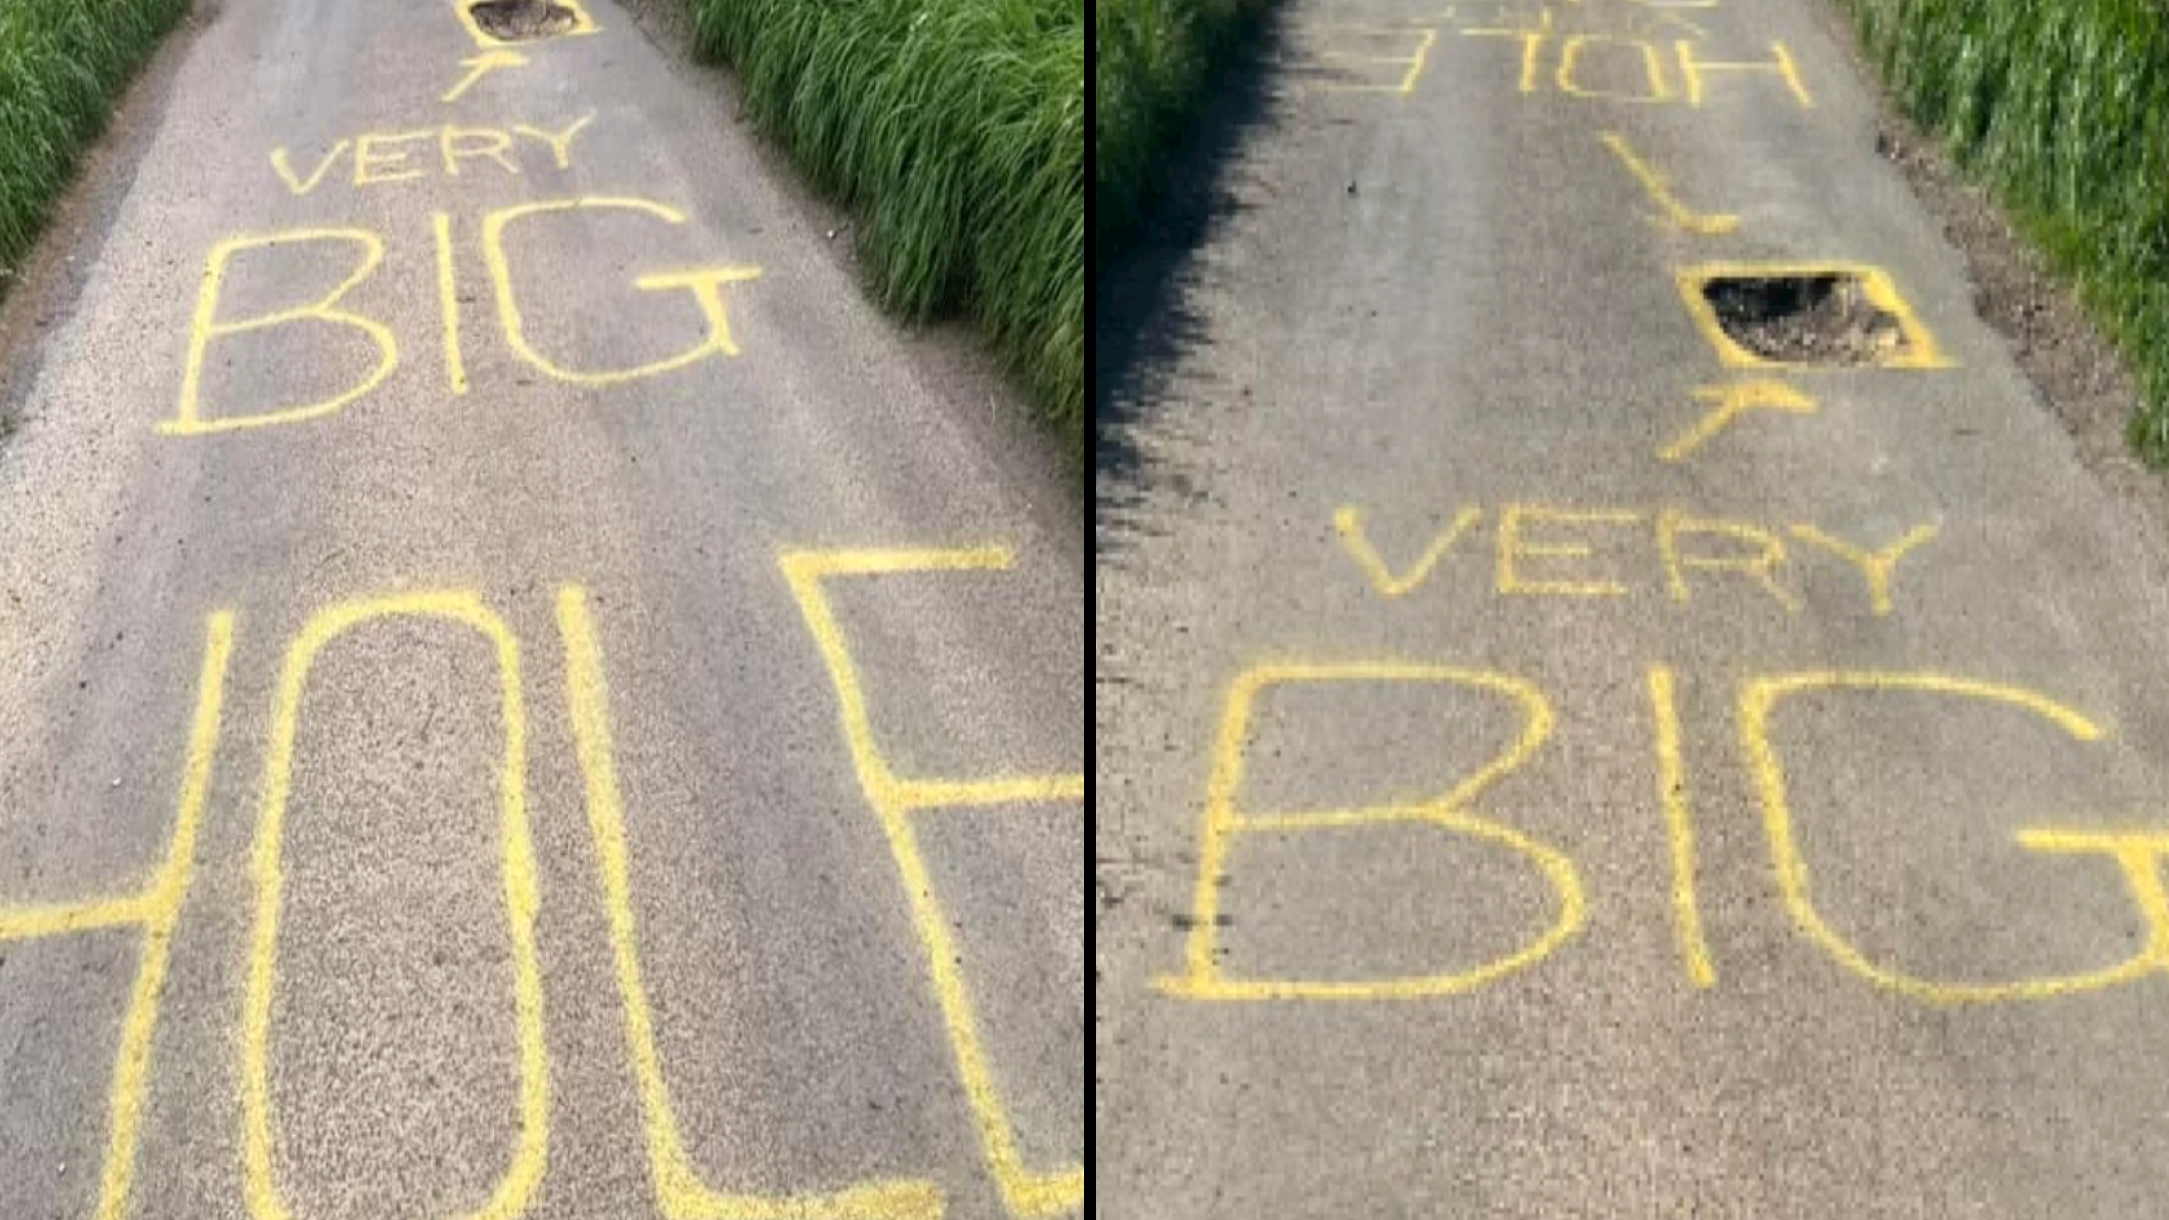 Mystery 'Artist' Warns Drivers With Very Clear Message On Road